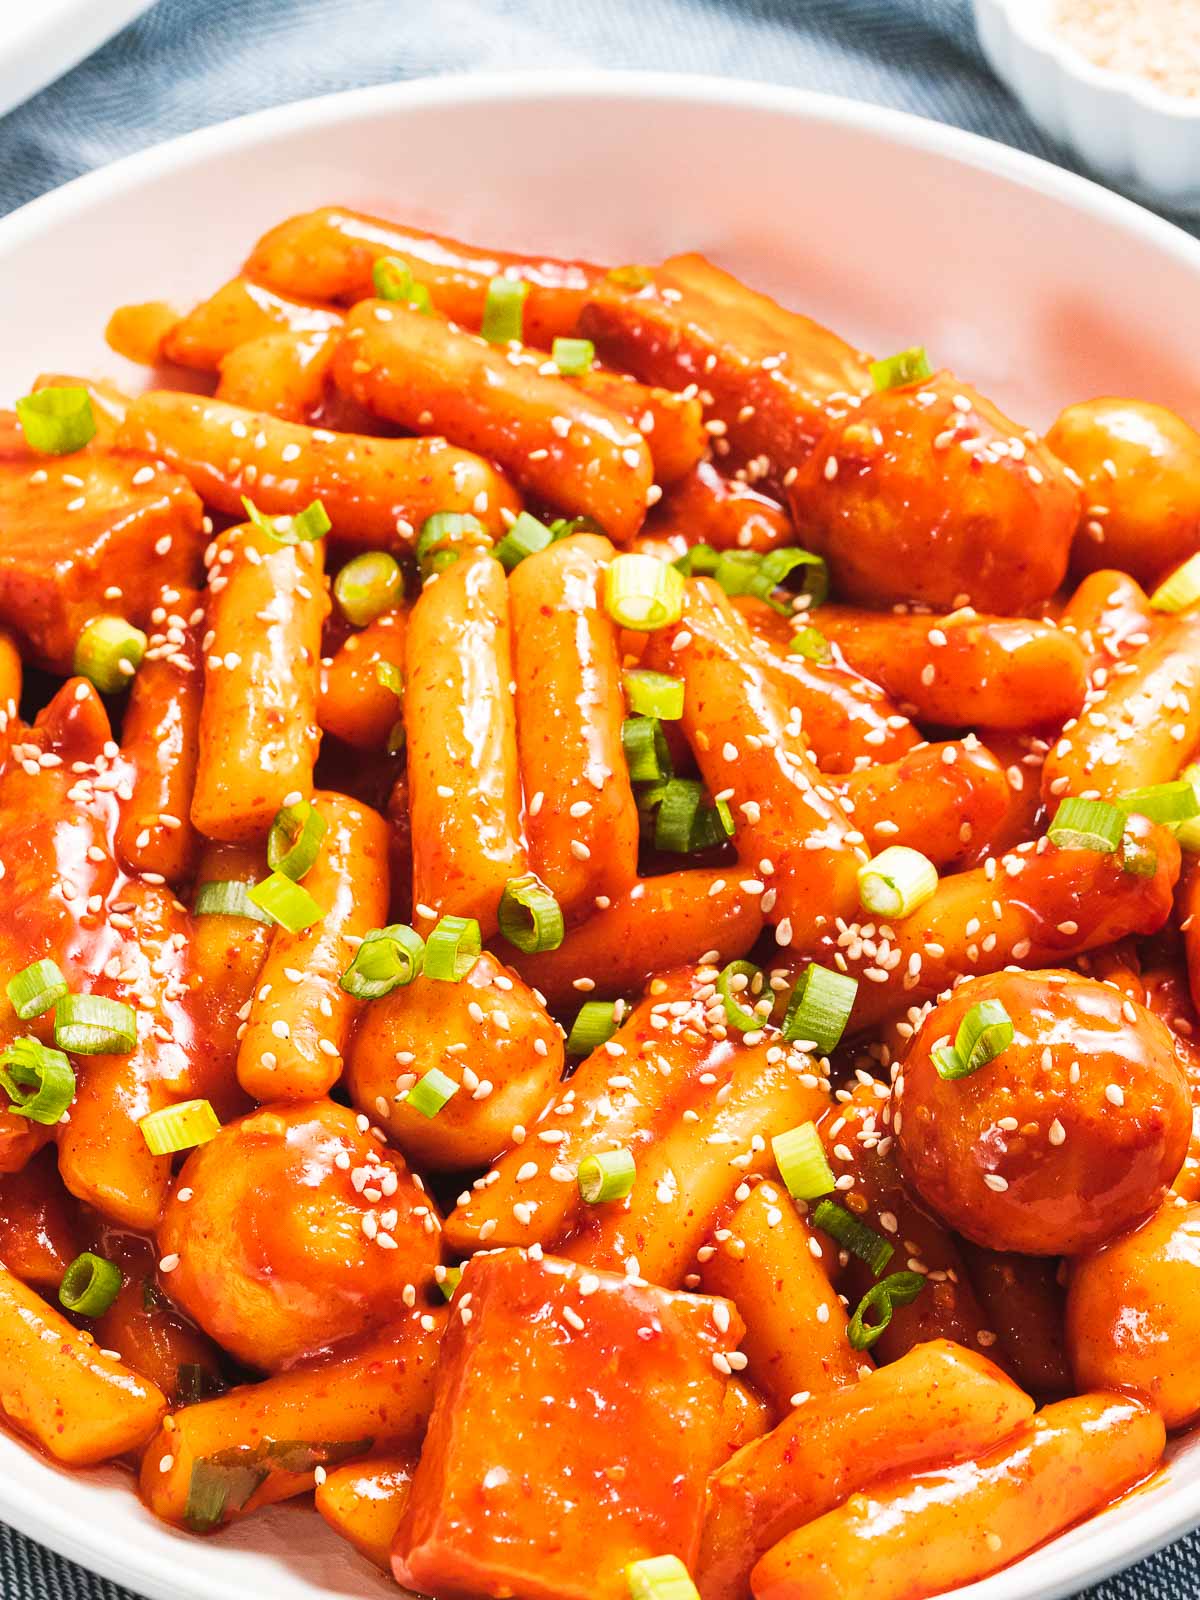 Tteokbokki made with gochujang and fish cakes garnished with scallions in a white bowl with red chopsticks.